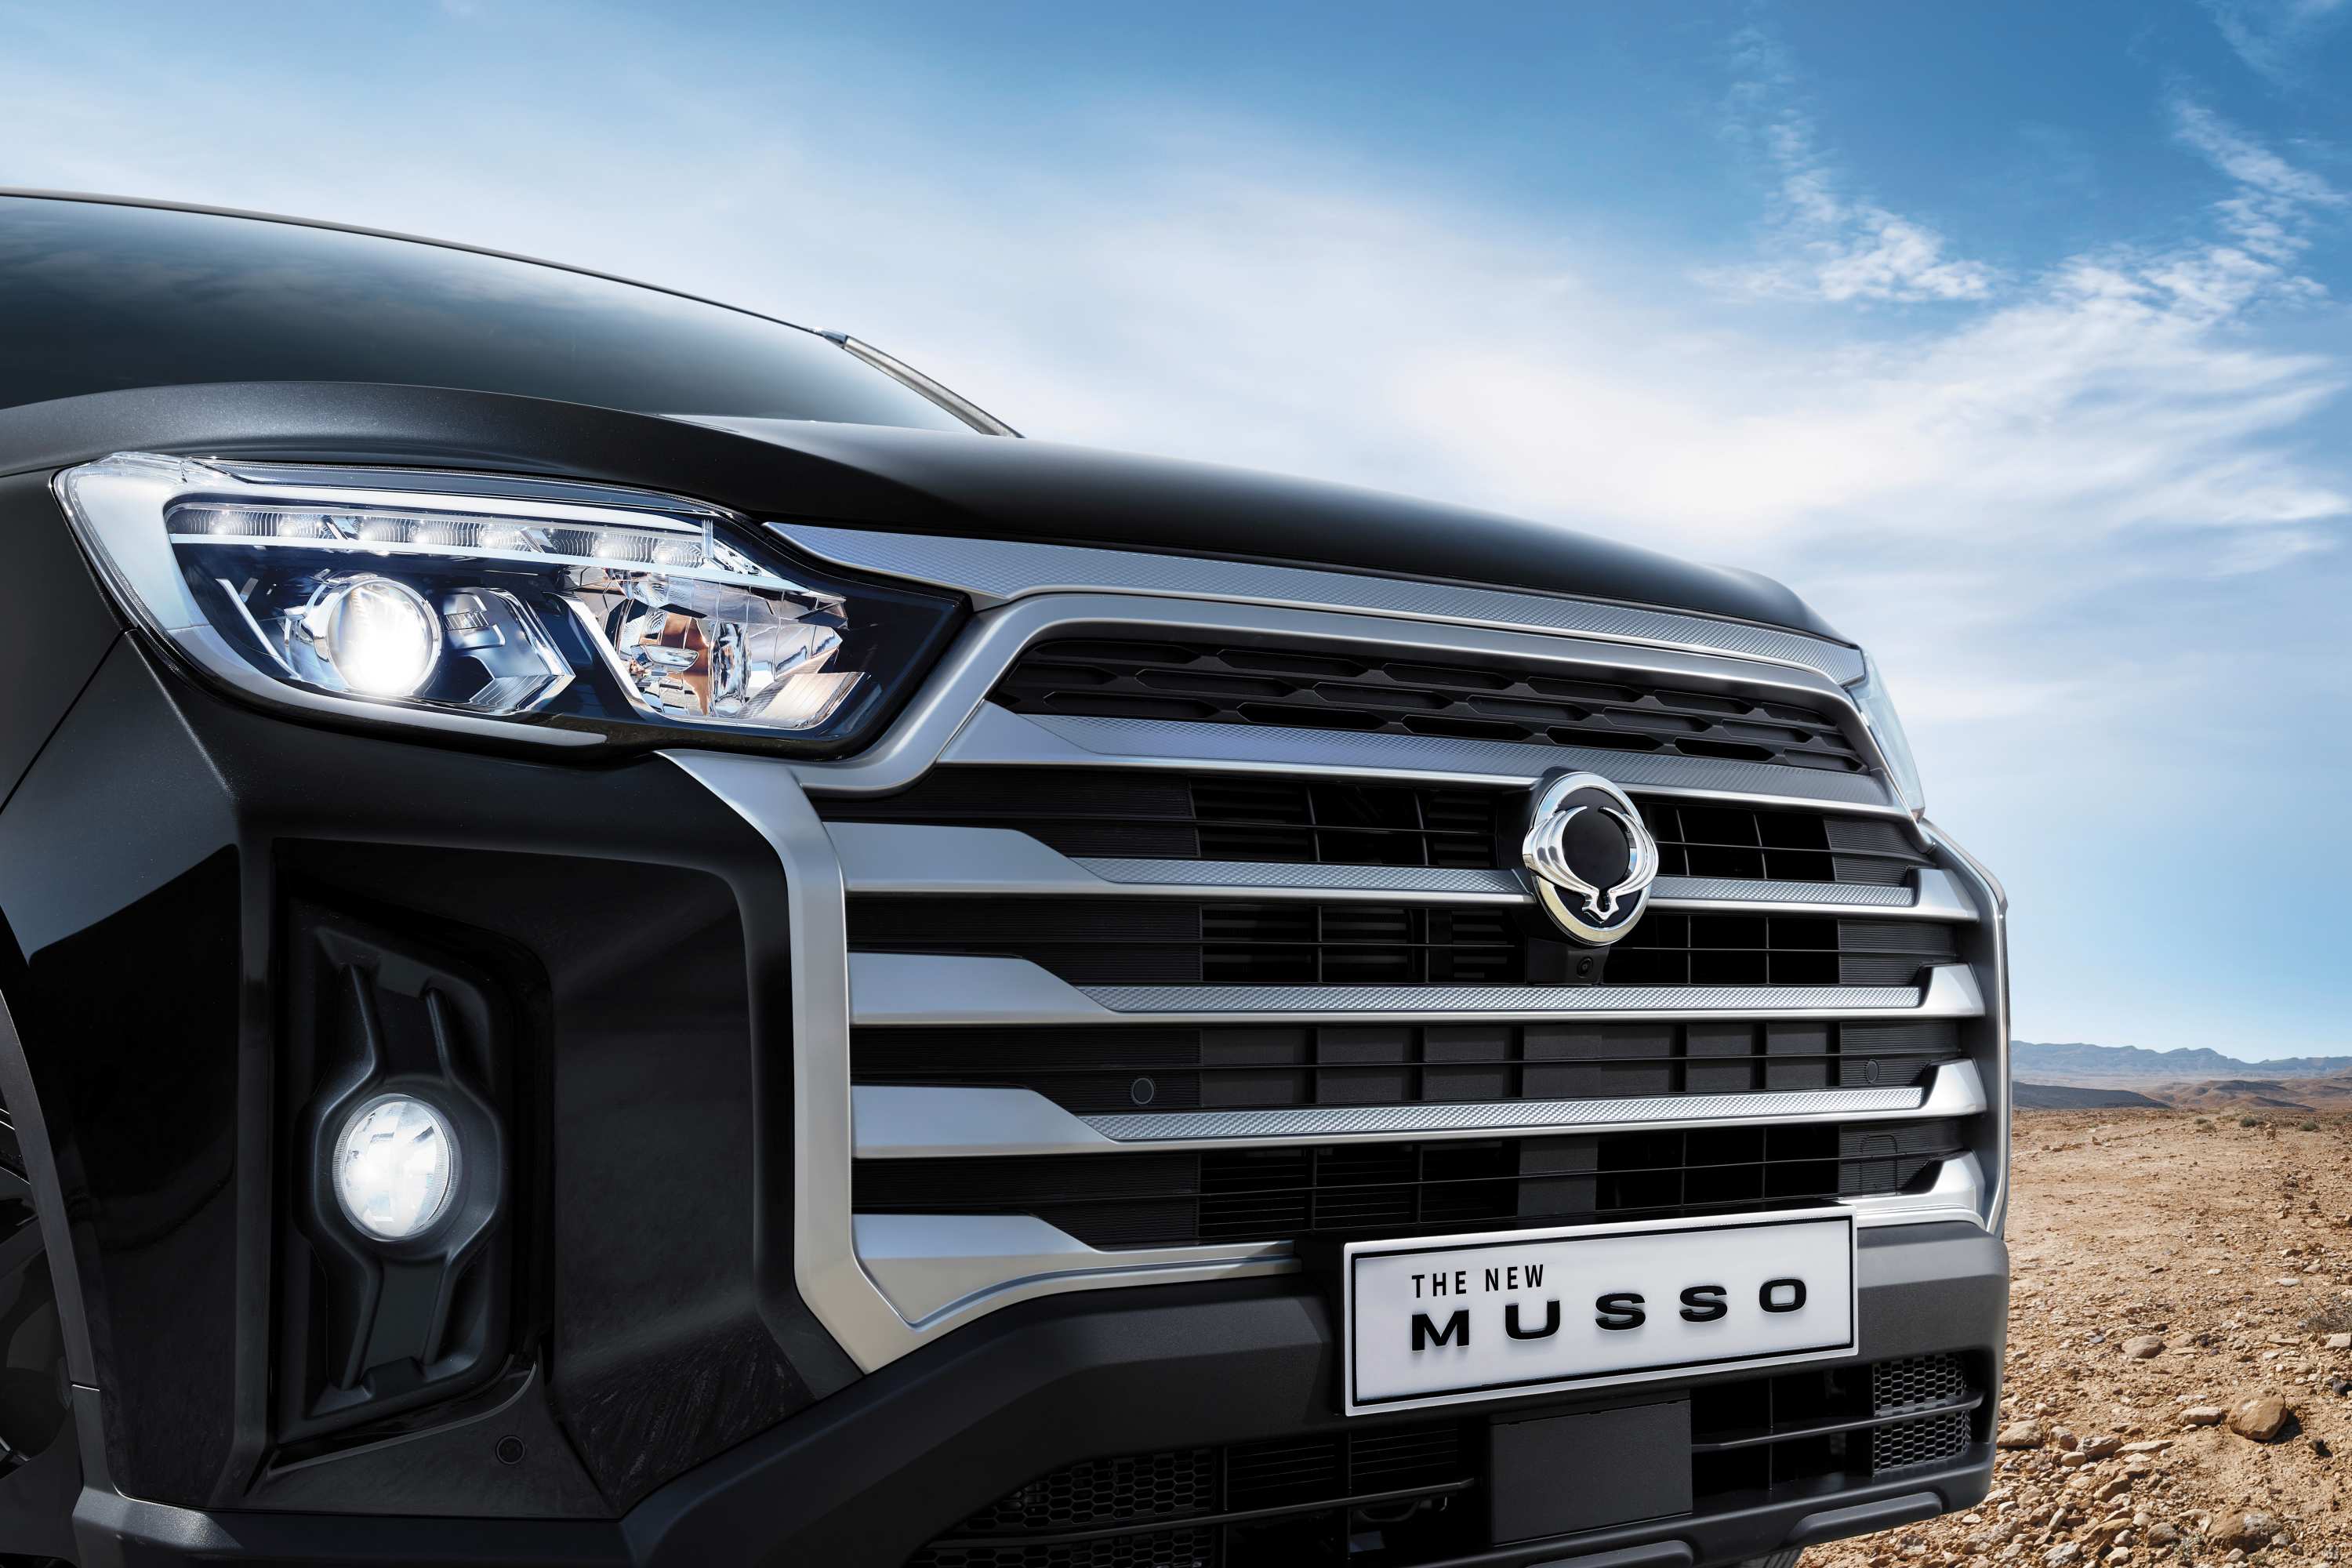 2021 Musso 4x4 dual cab Ute with a striking new front end design, new wheel designs and rear LED lighting.